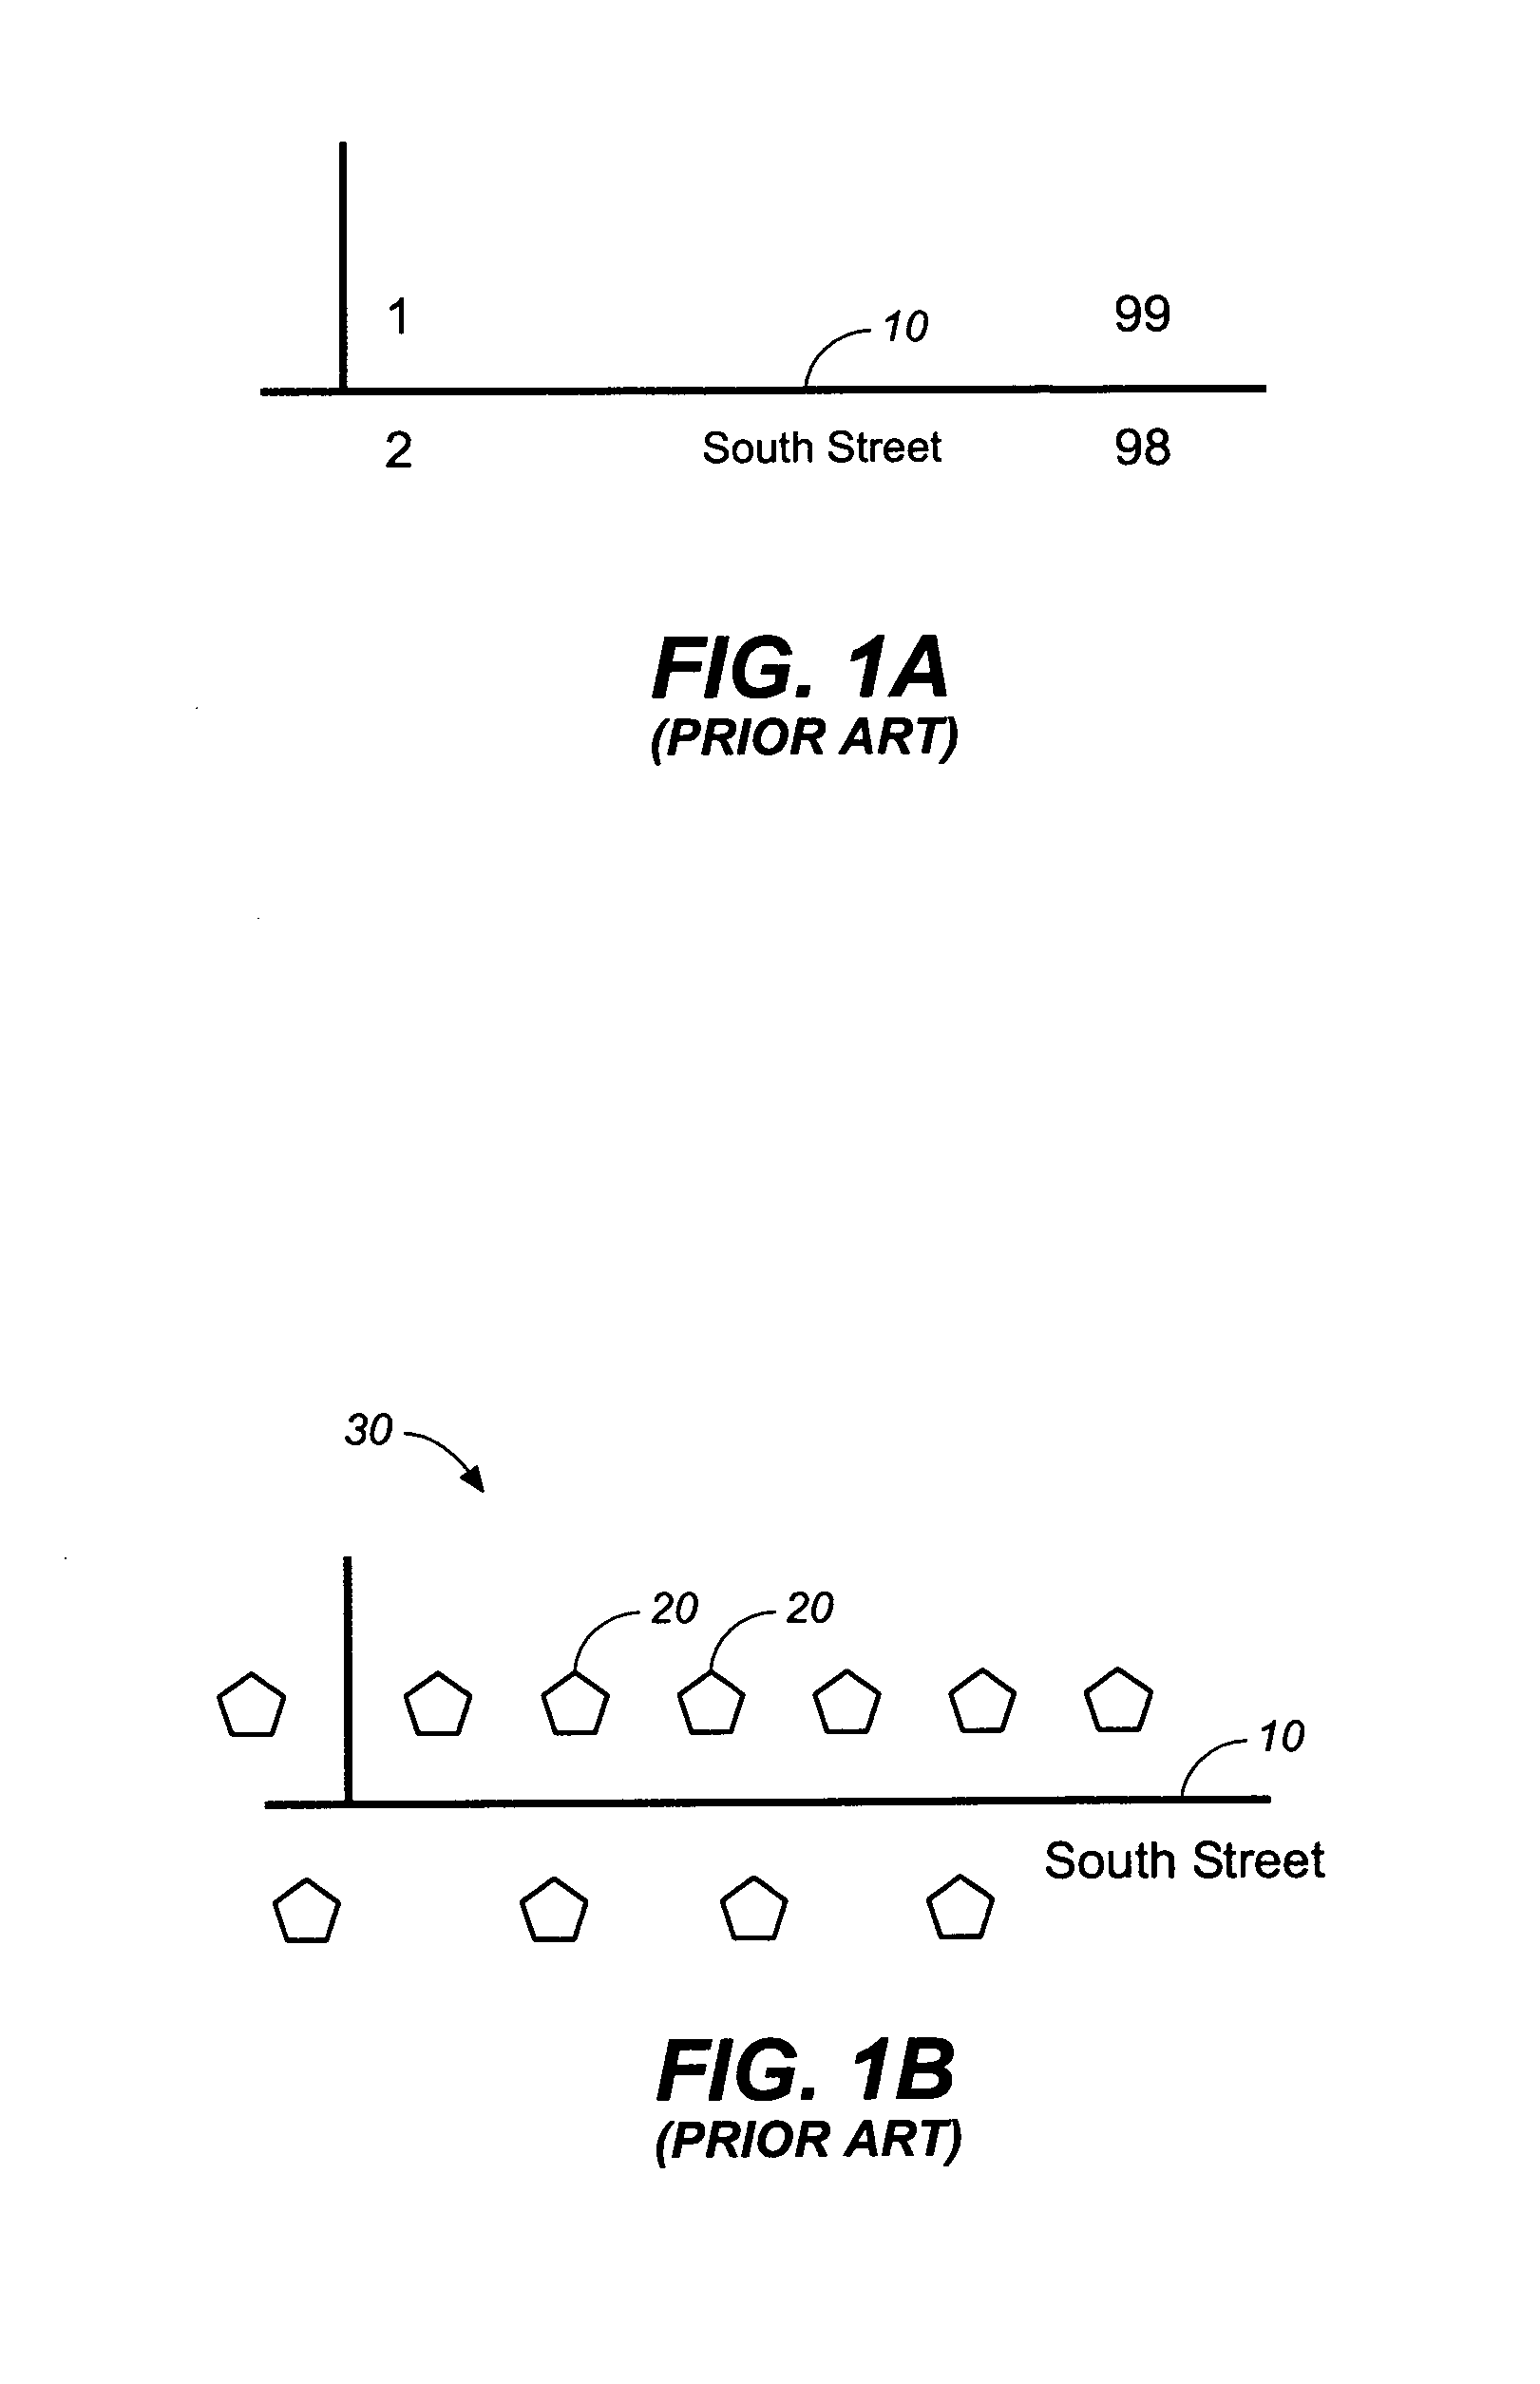 System and method of geospatially mapping topological regions and displaying their attributes